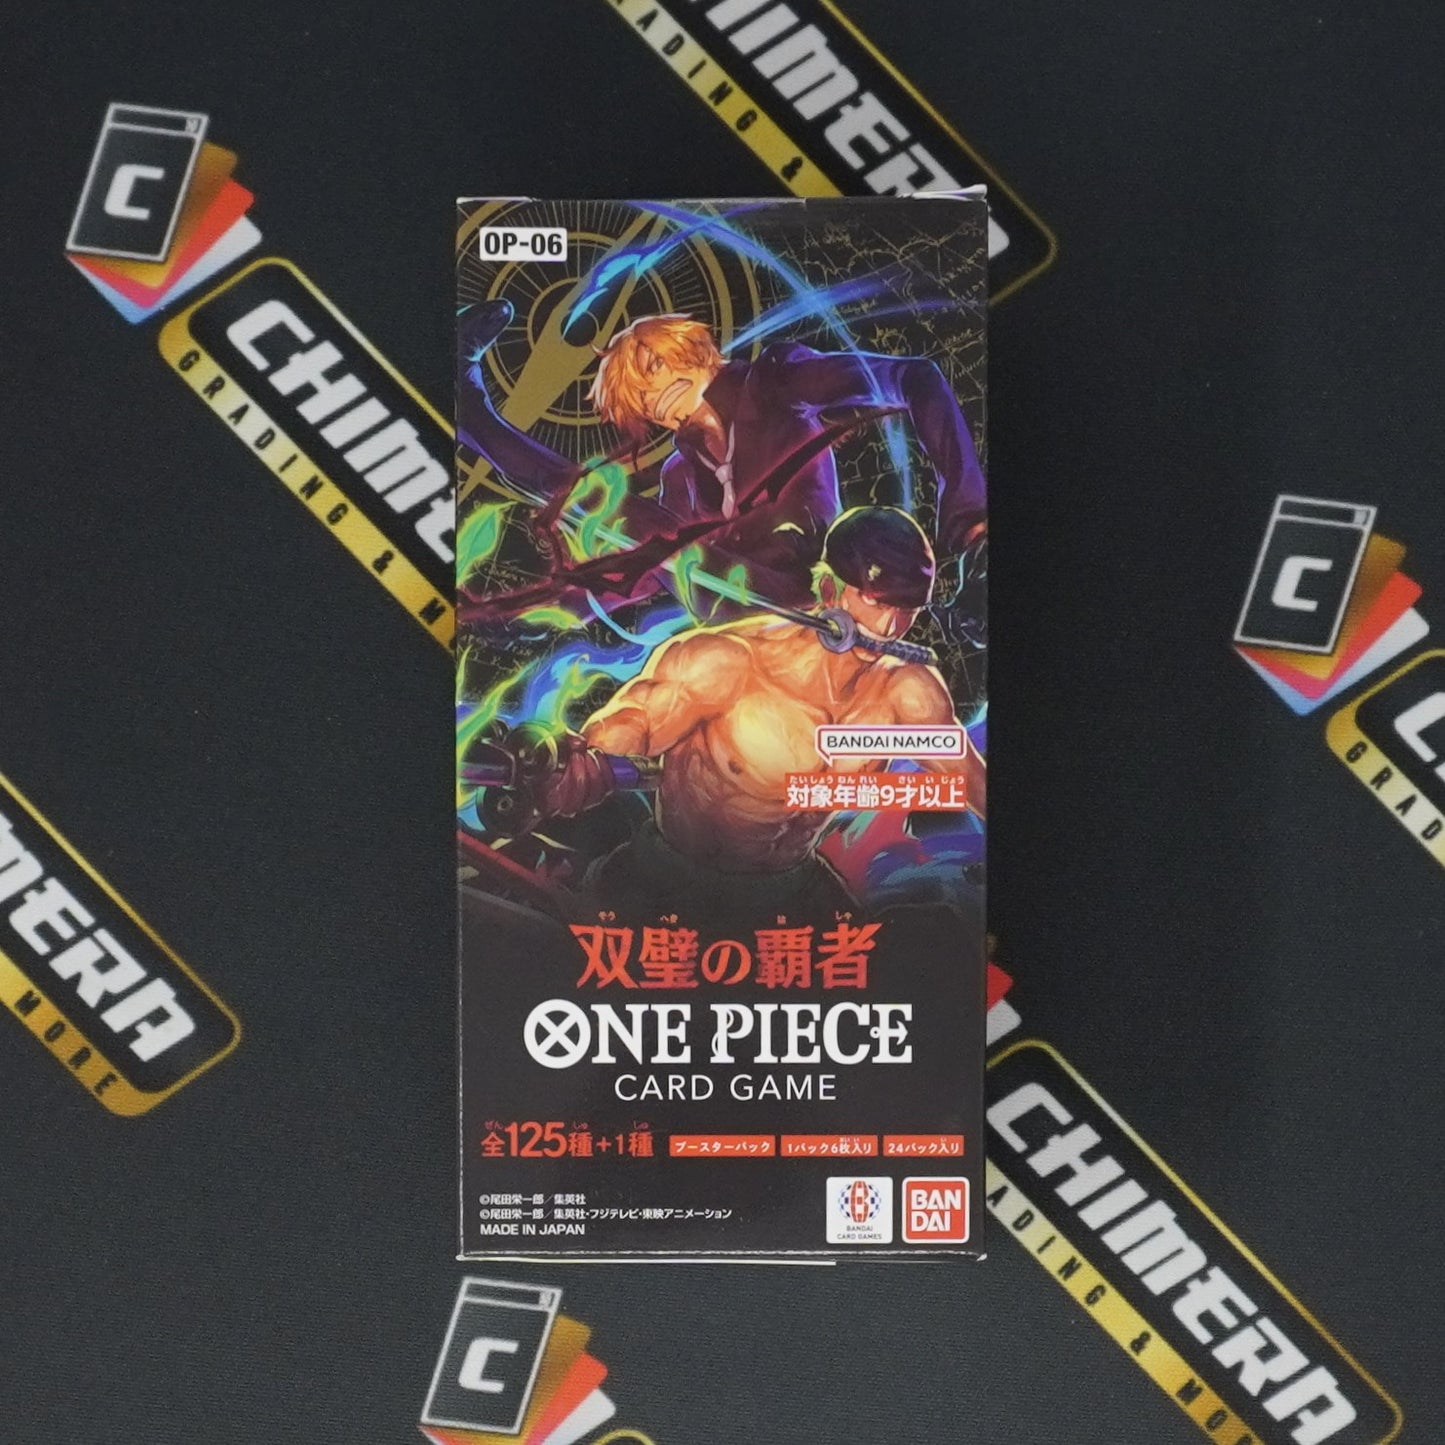 One Piece "Wings of the Captain" OP-06 Booster Box Japanese